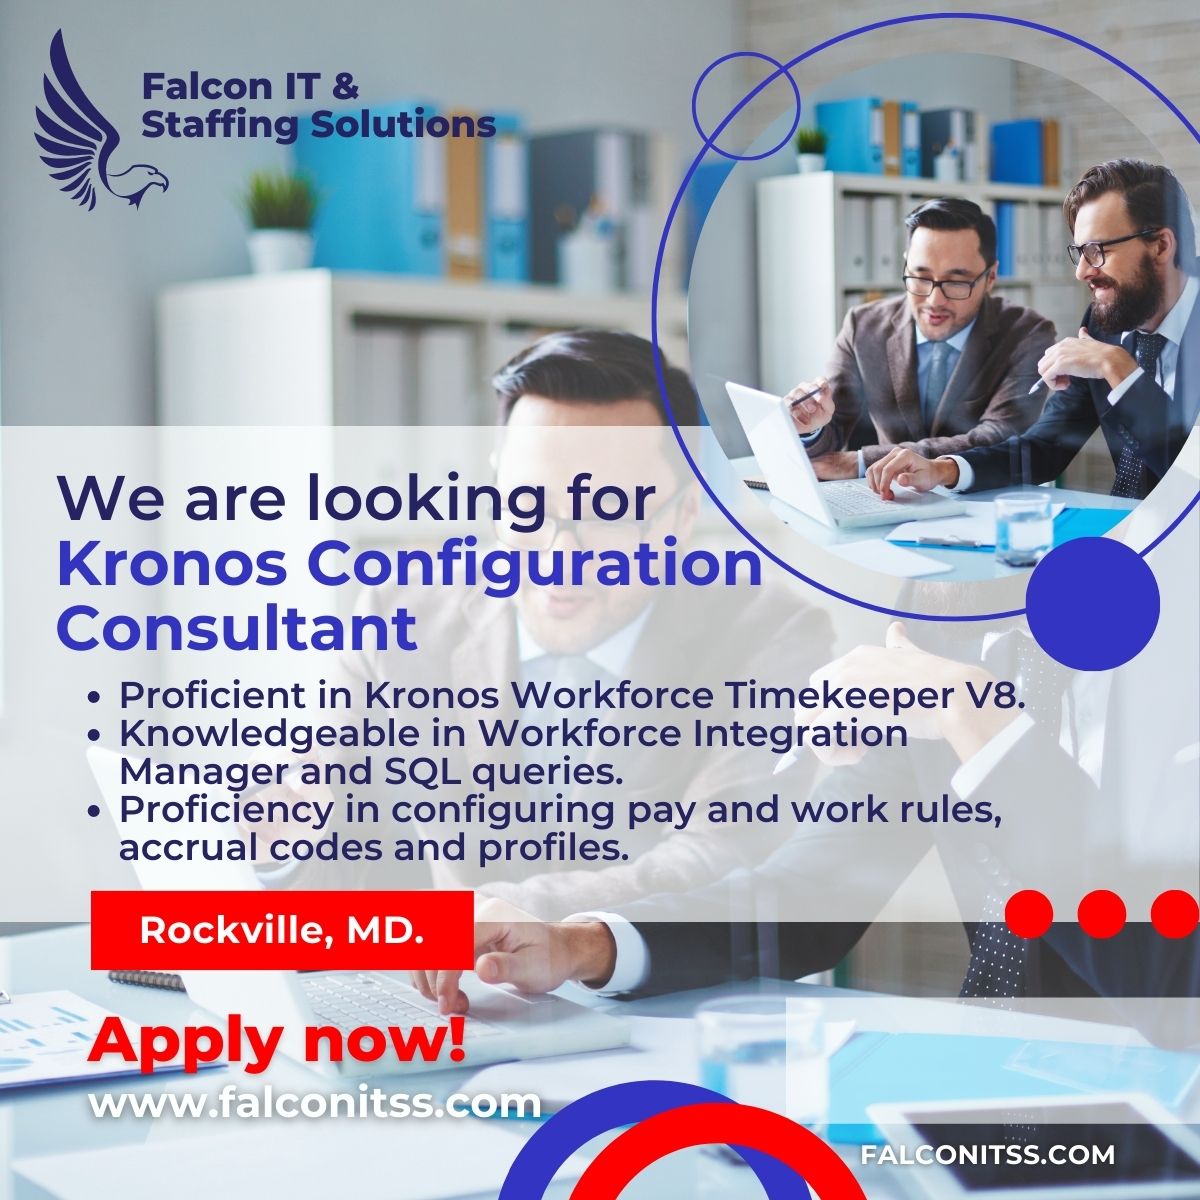 #HIRING a Kronos Configuration Consultant to provide admin and functional support to MCtime end users.

📌 APPLY HERE: bit.ly/46RzAHv
📧 Email Mitchell Cohen at mcohen@falconitss.com to apply.
📍Location: Rockville, MD.

@falconitss
#kronos #techjobs #consultantjobs